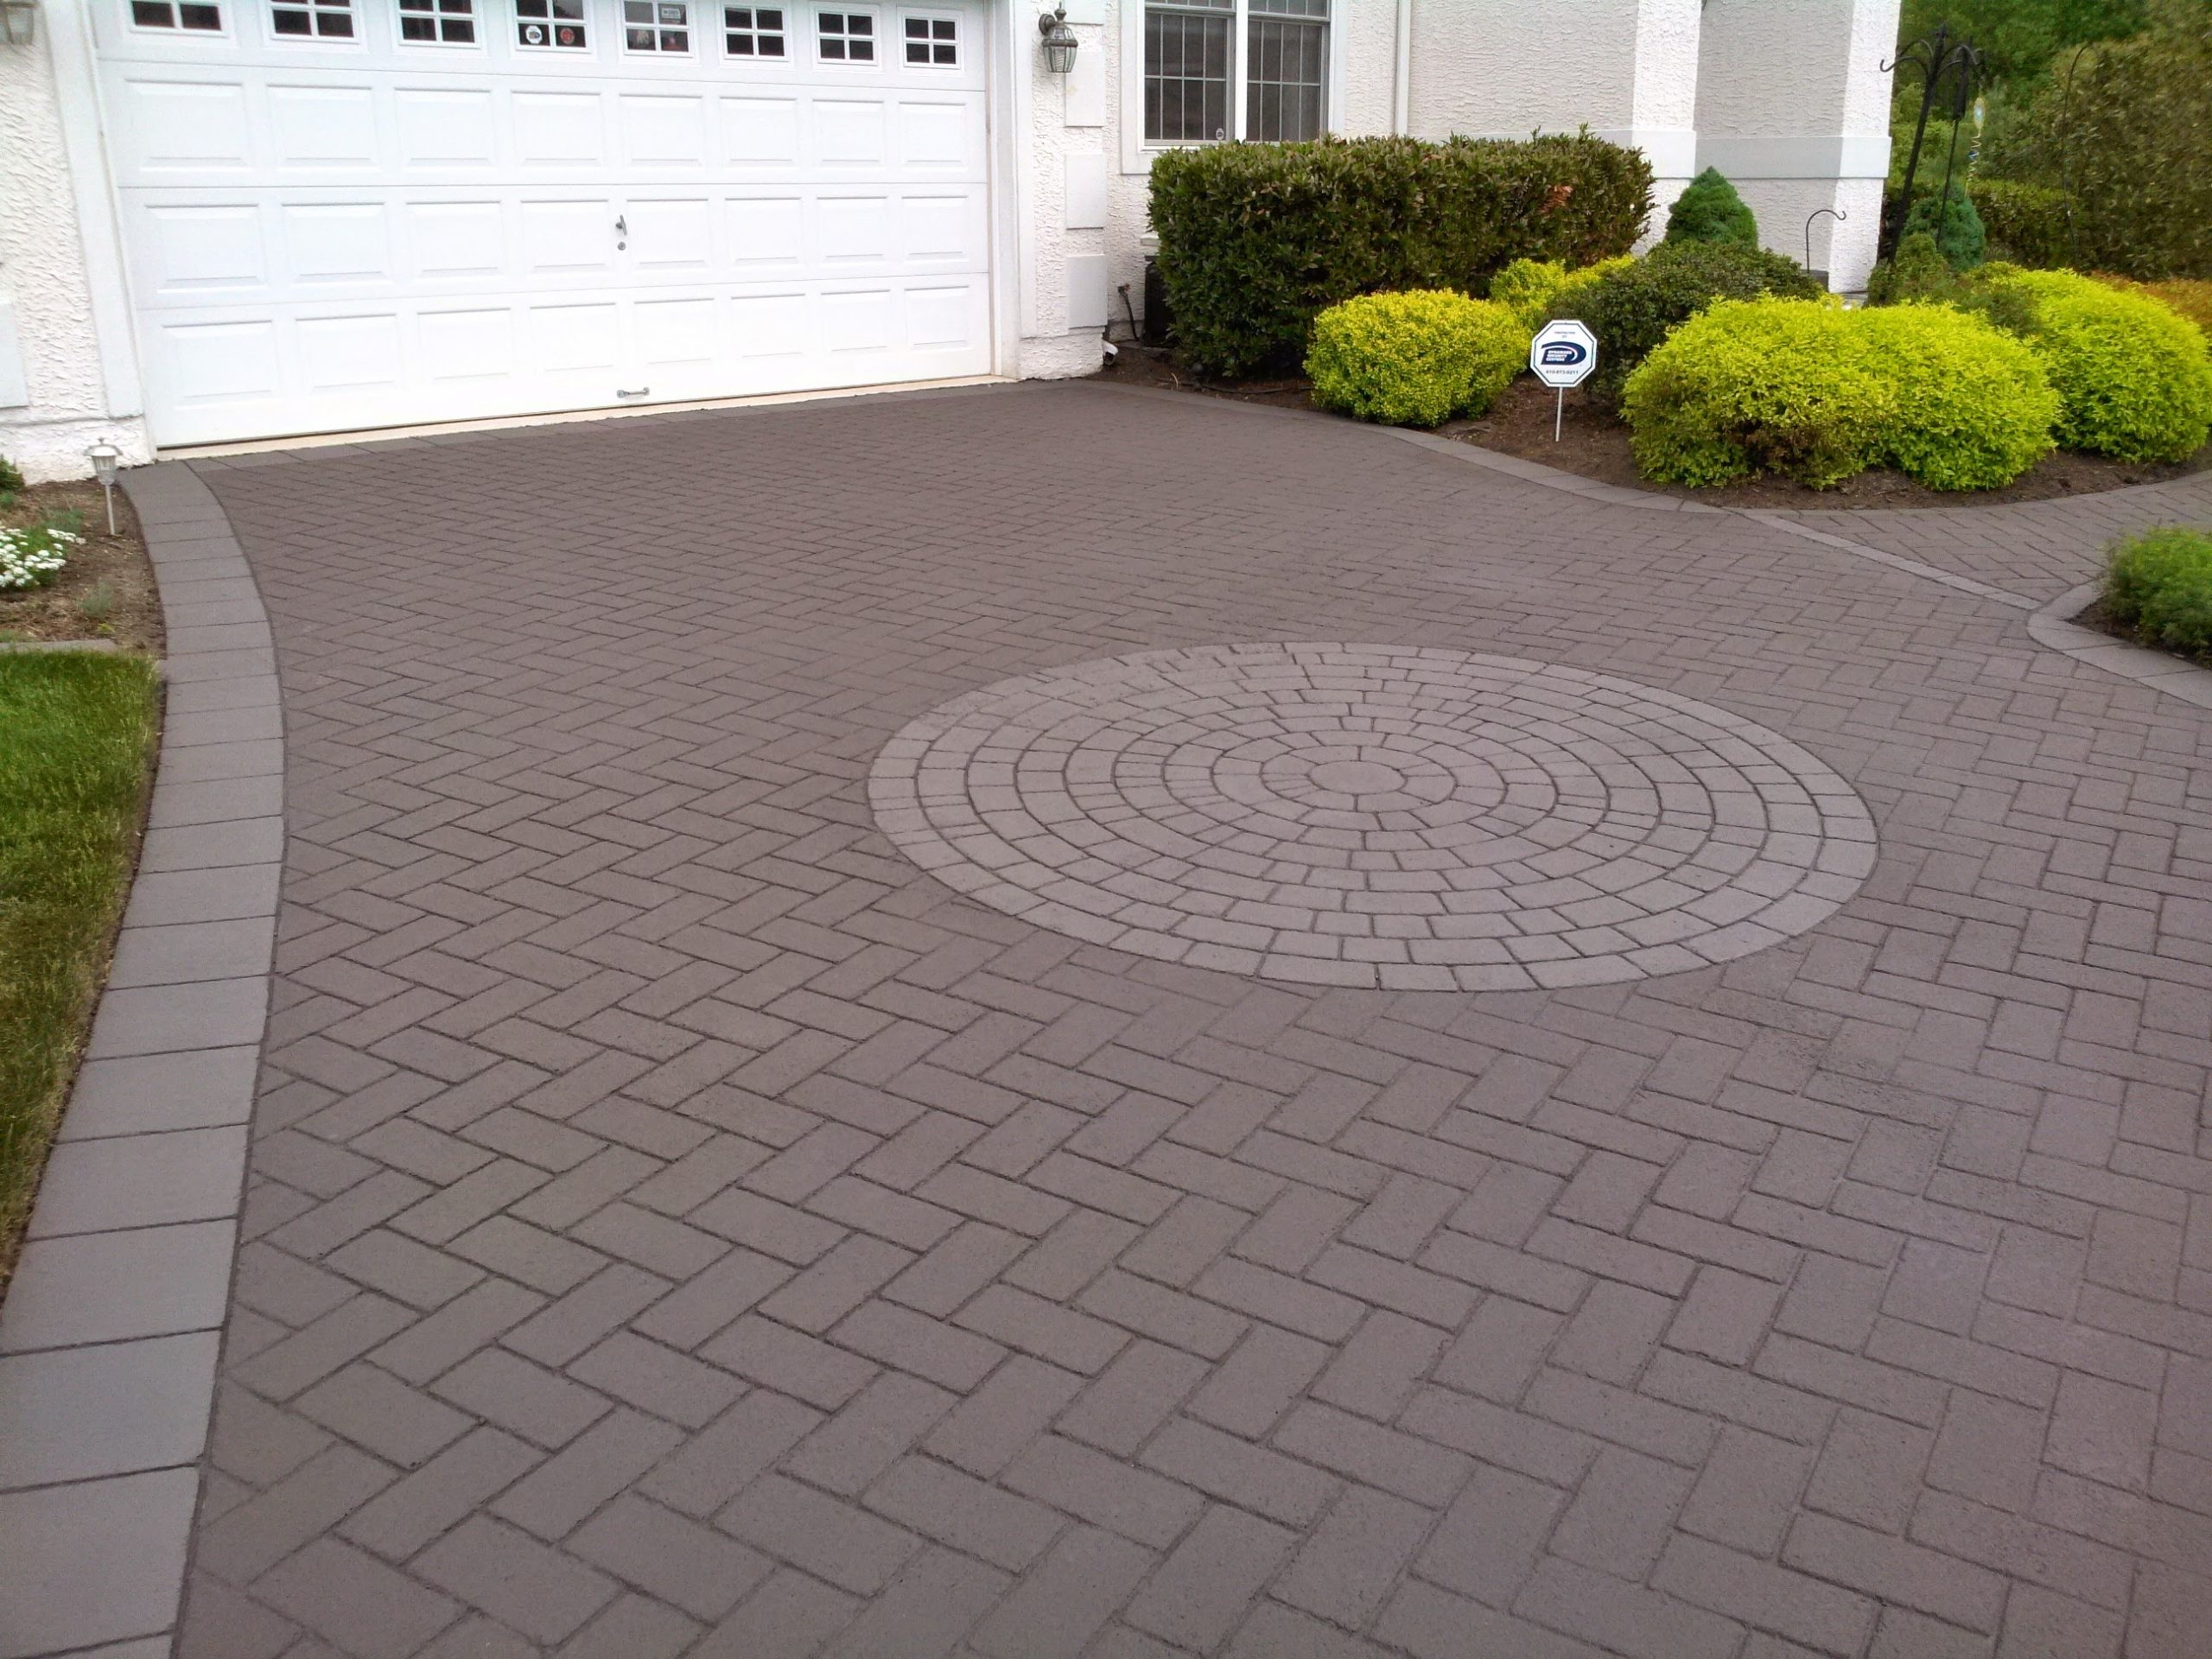 Stamped Asphalt Paving Services in Exton, PA<br />
